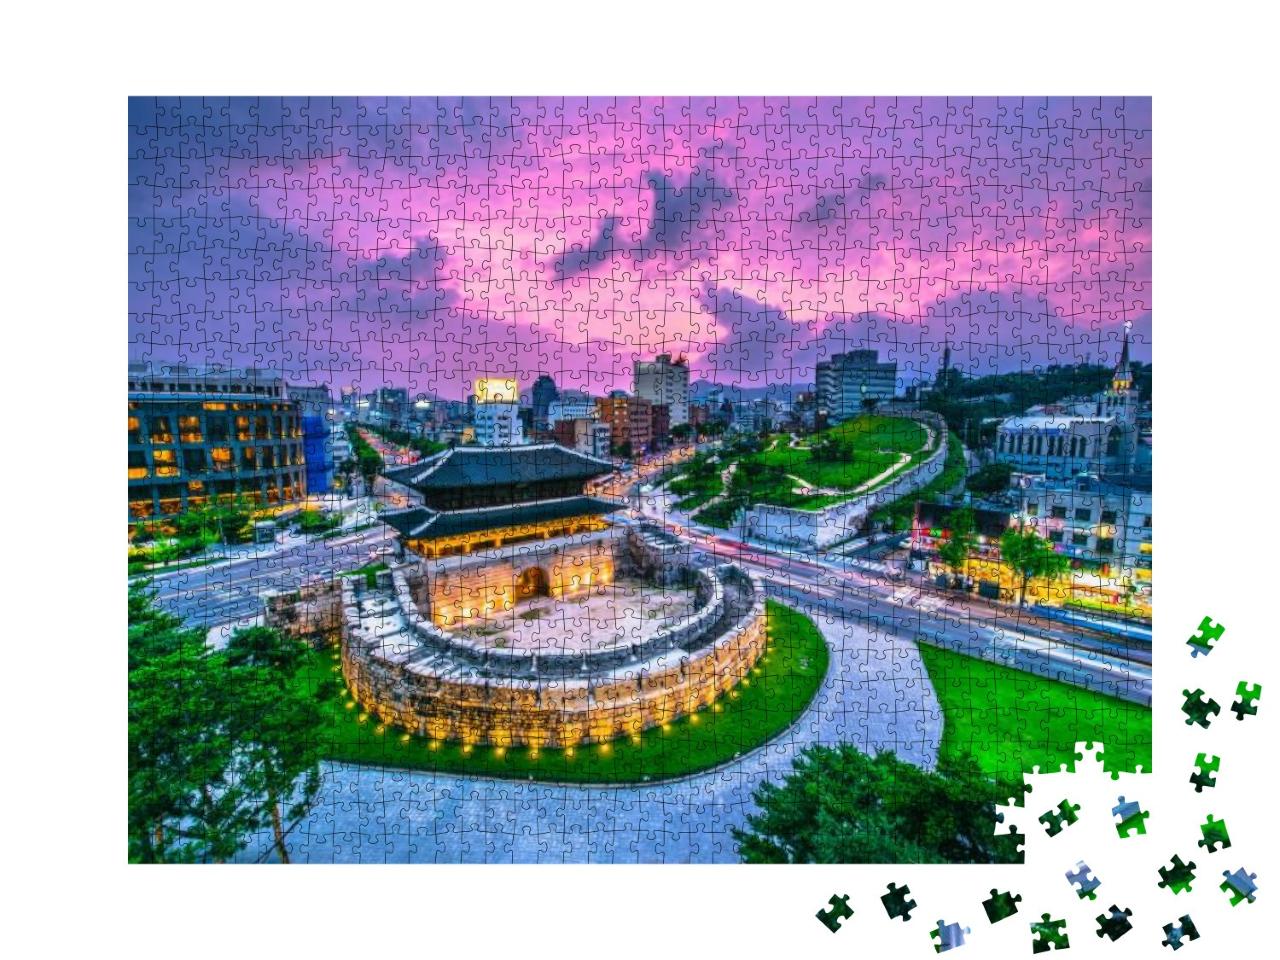 Seoul Dongdaemun Gate & Traffic in Seoul, South Korea... Jigsaw Puzzle with 1000 pieces